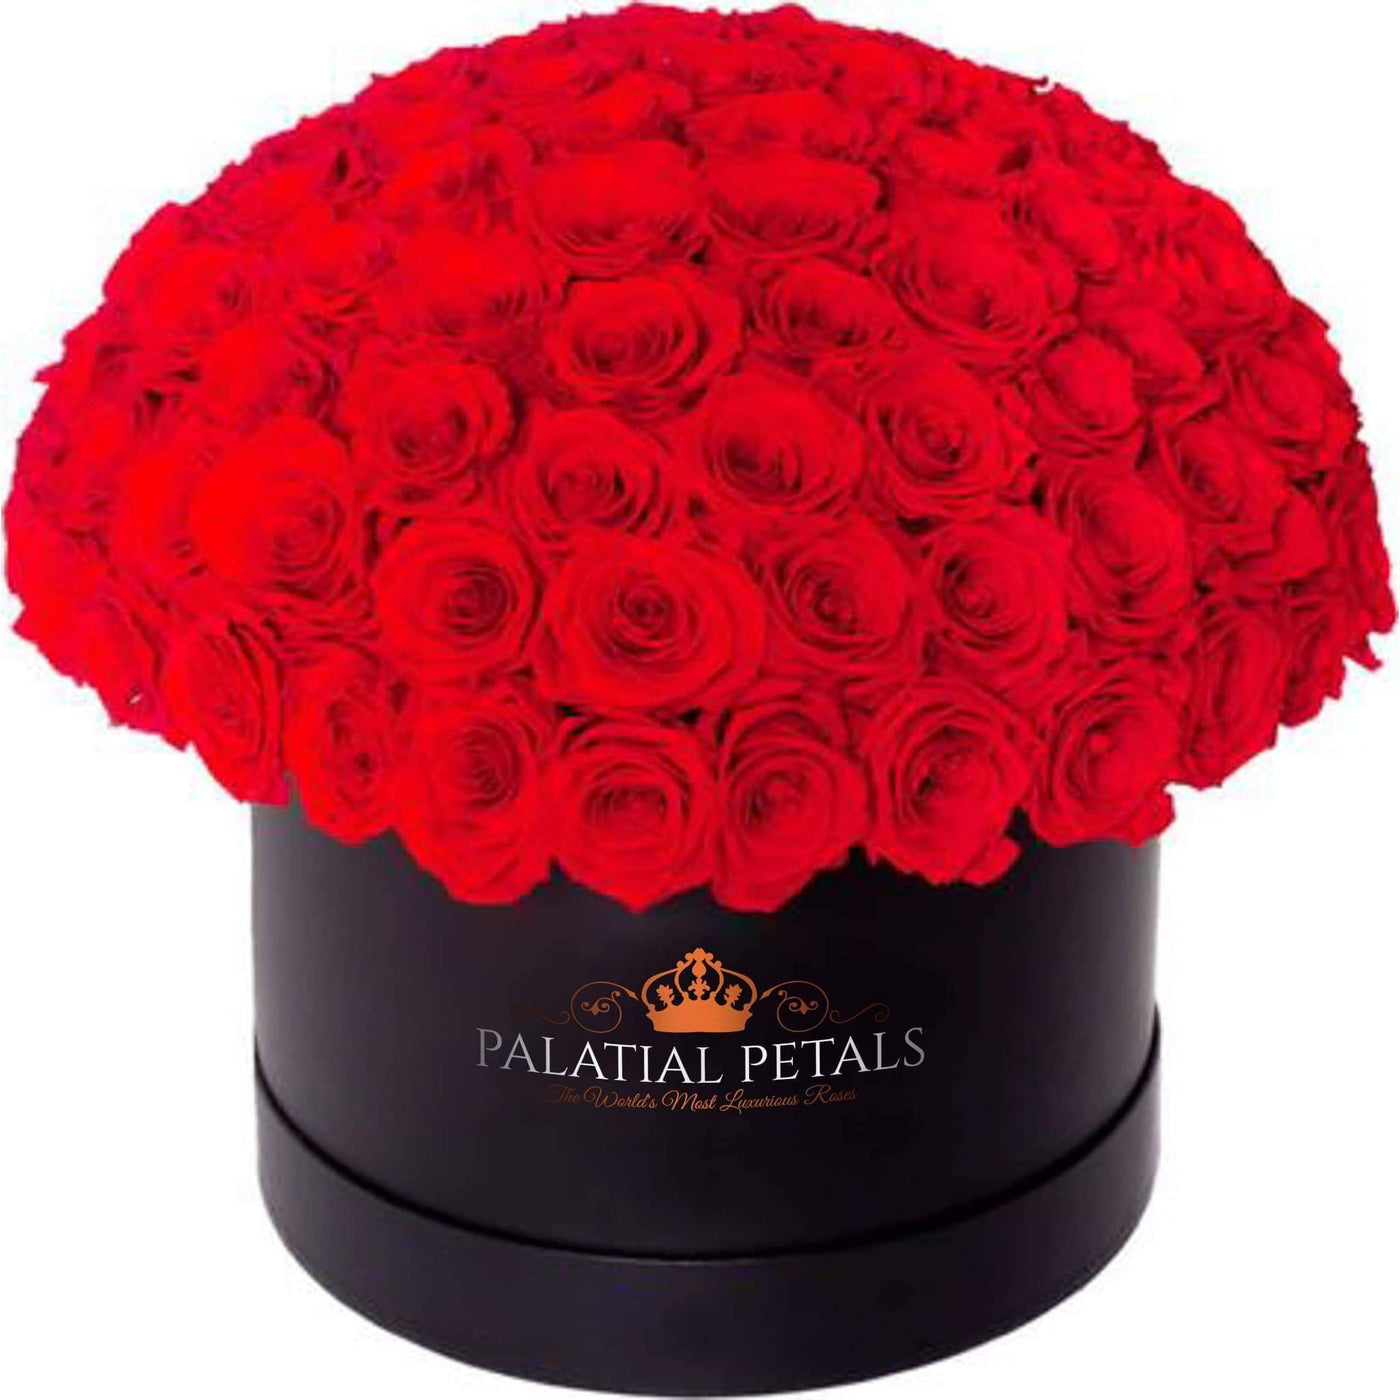 Red Roses That Last A Year - Grande "Dome 360" Rose Box